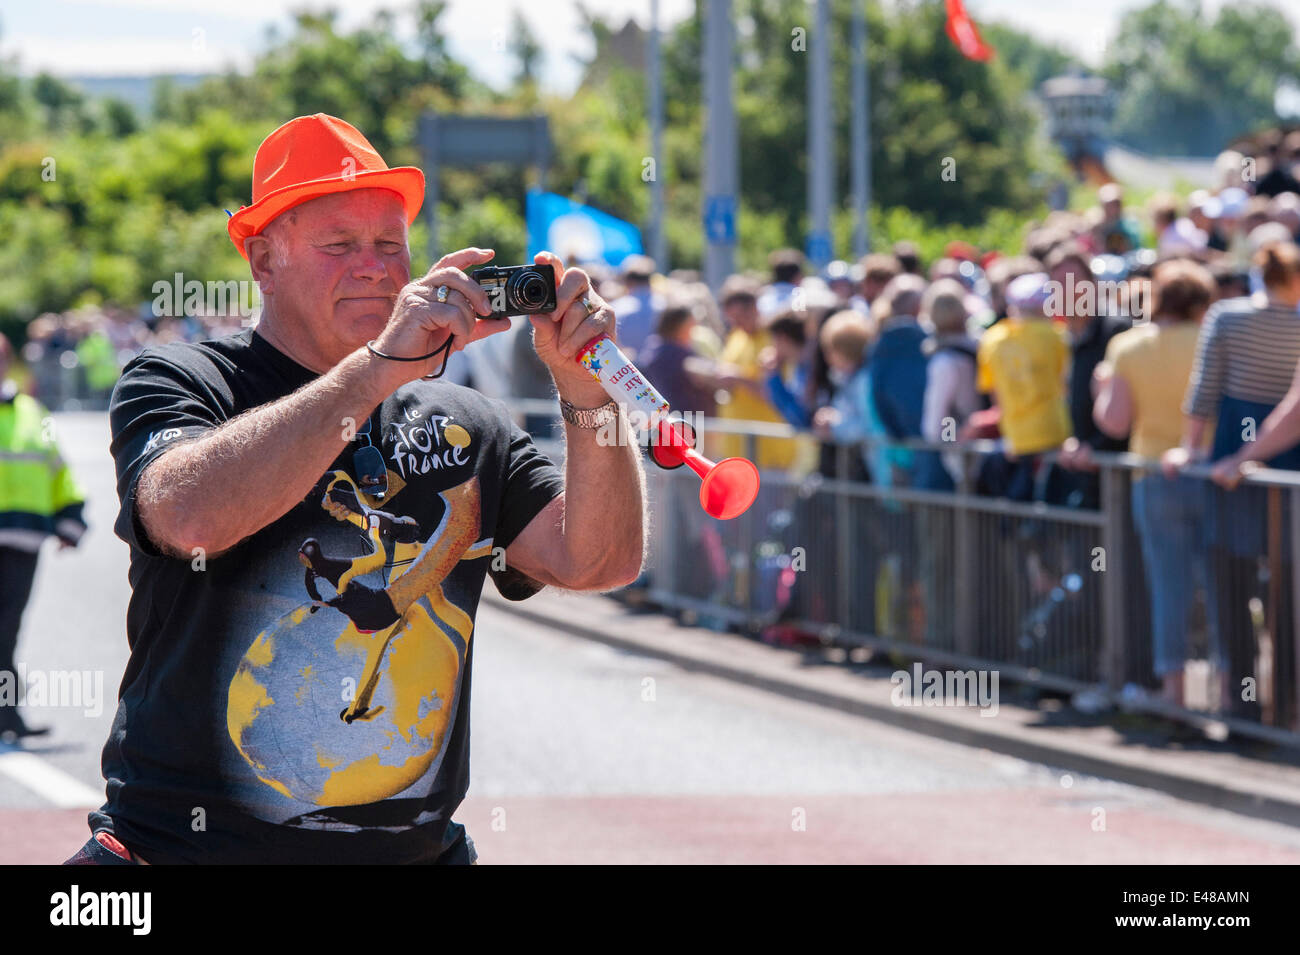 Burley-In-Wharfedale, Yorkshire, England, UK. July 5th 2014 .Large crowd of spectators stand behind barriers on the stage one route of the Tour De France, while 1 one man wearing an orange trilby sunhat, is leaning out, taking a photograph with a camera. Credit:  Ian Lamond/Alamy Live News Stock Photo